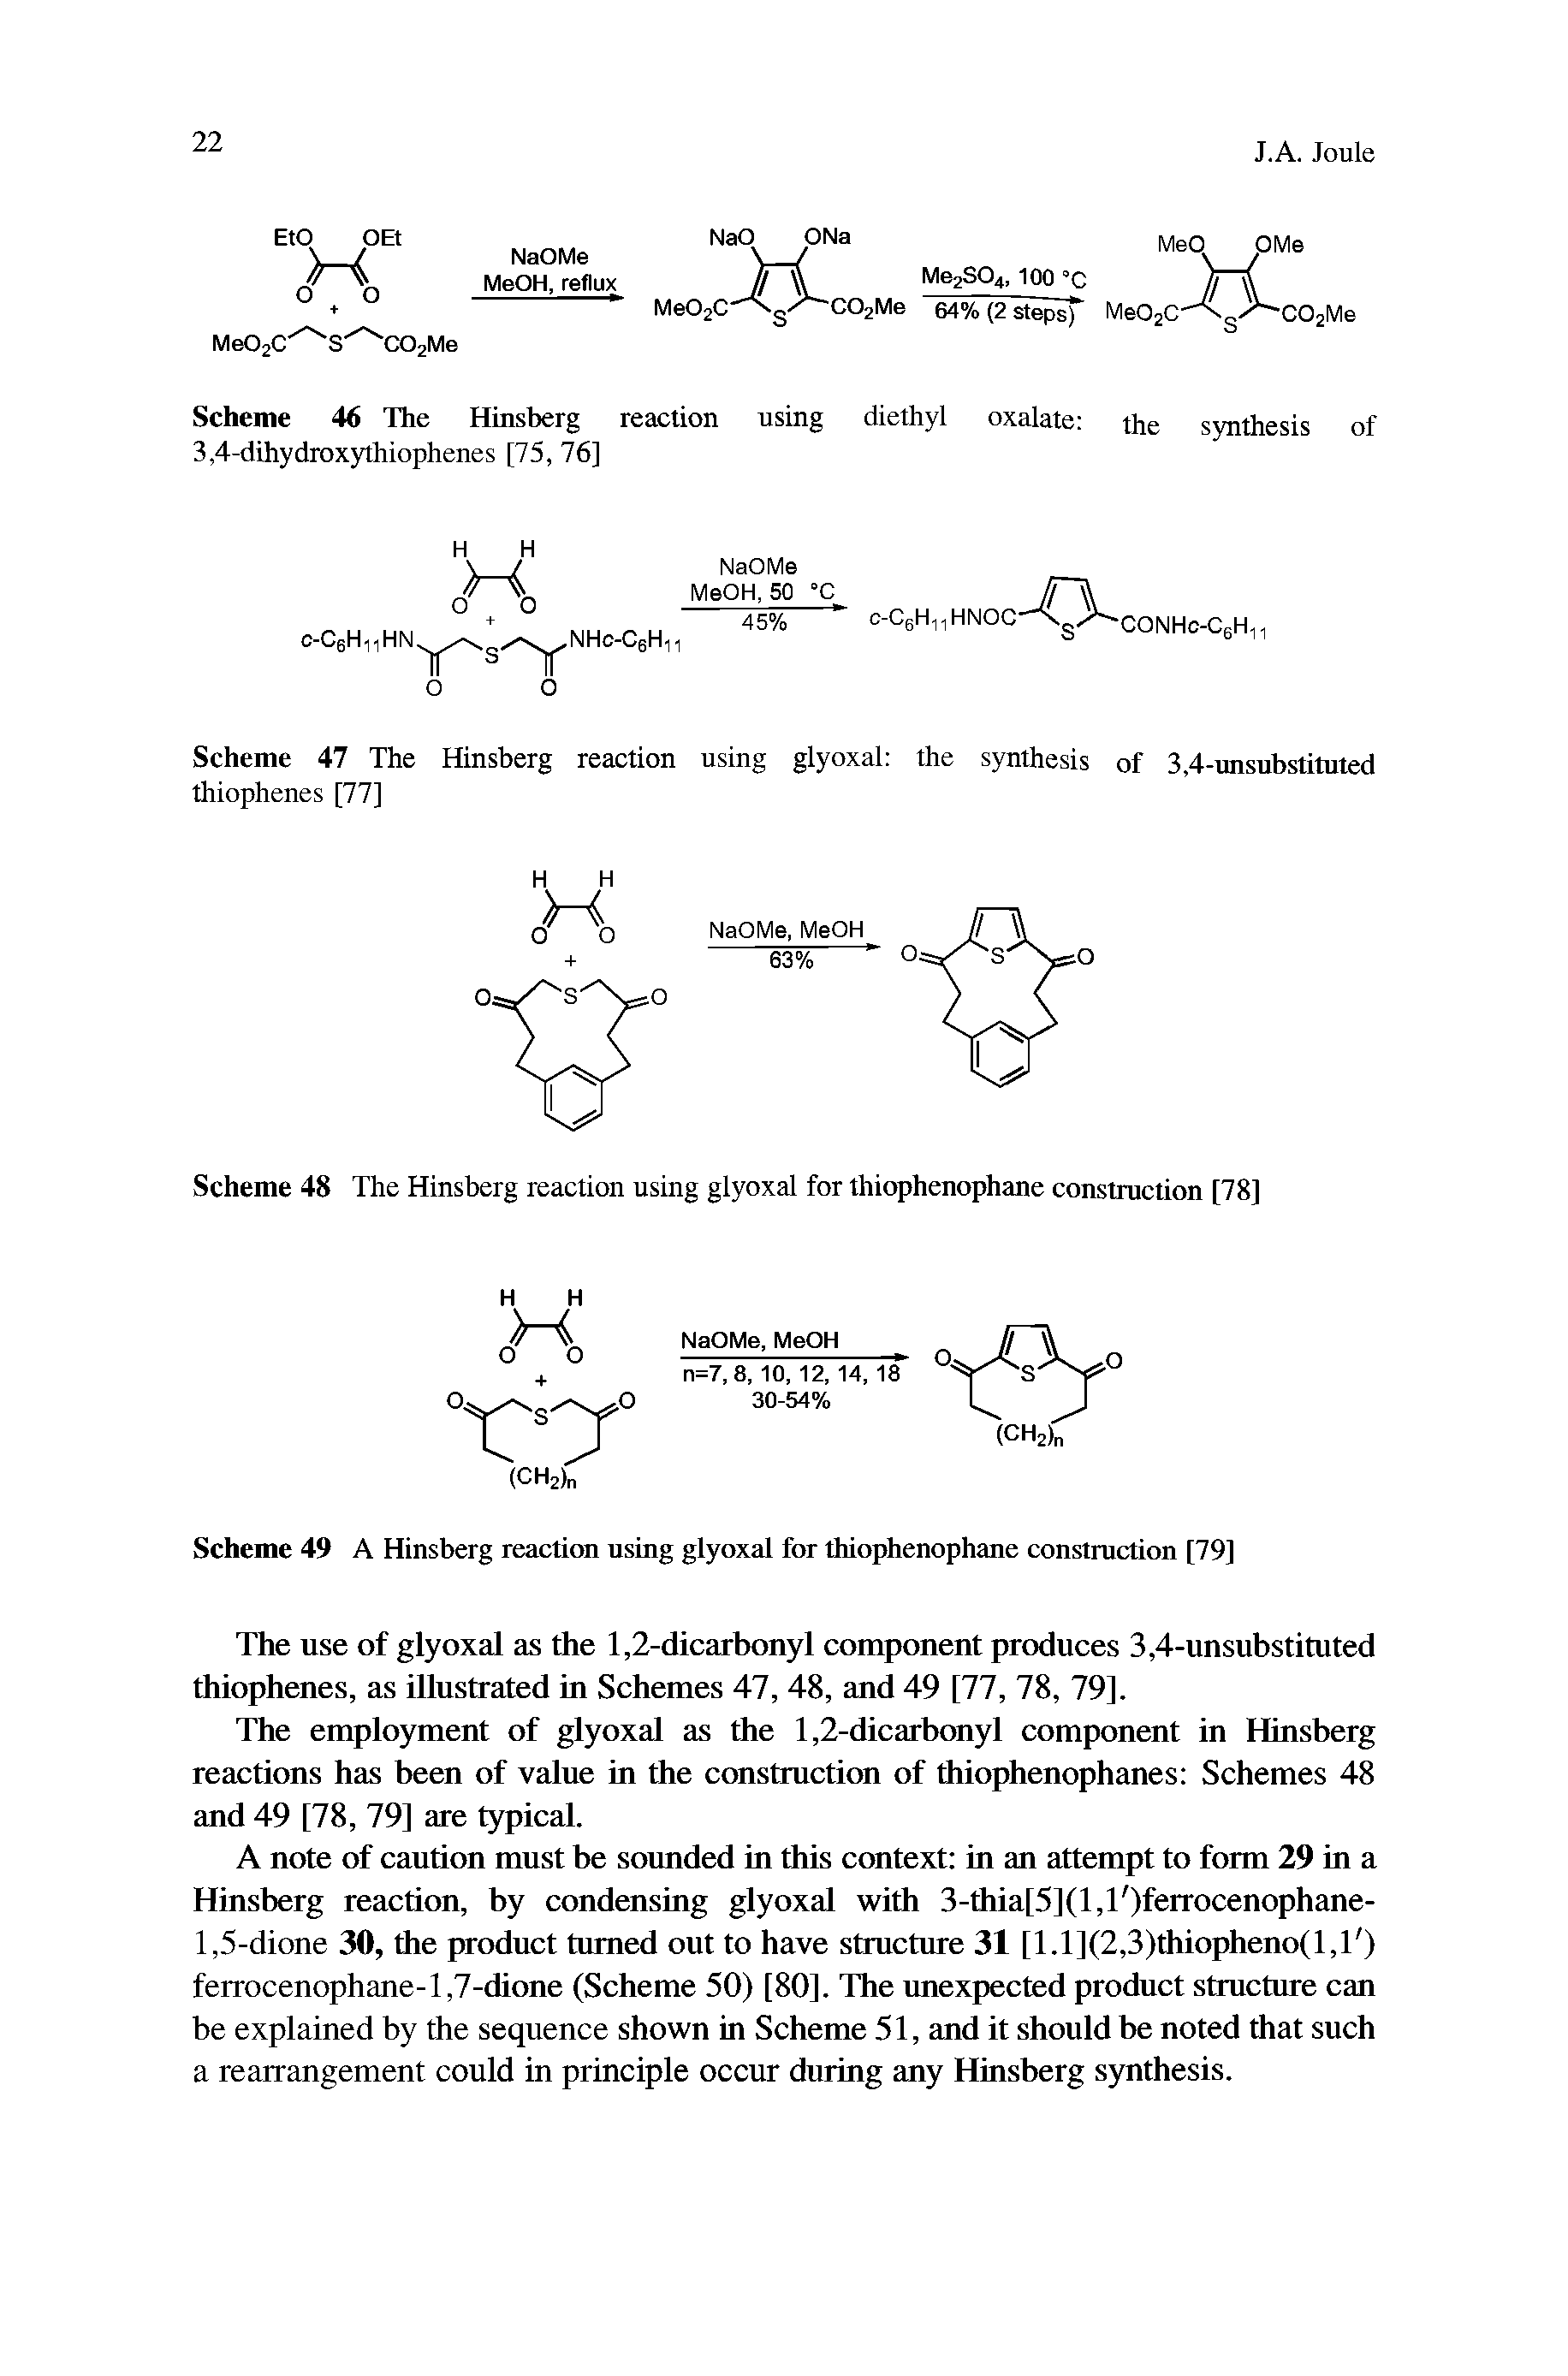 Scheme 46 The Hinsberg reaction using diethyl oxalate the synthesis of 3,4-dihydroxythiophenes [75, 76]...